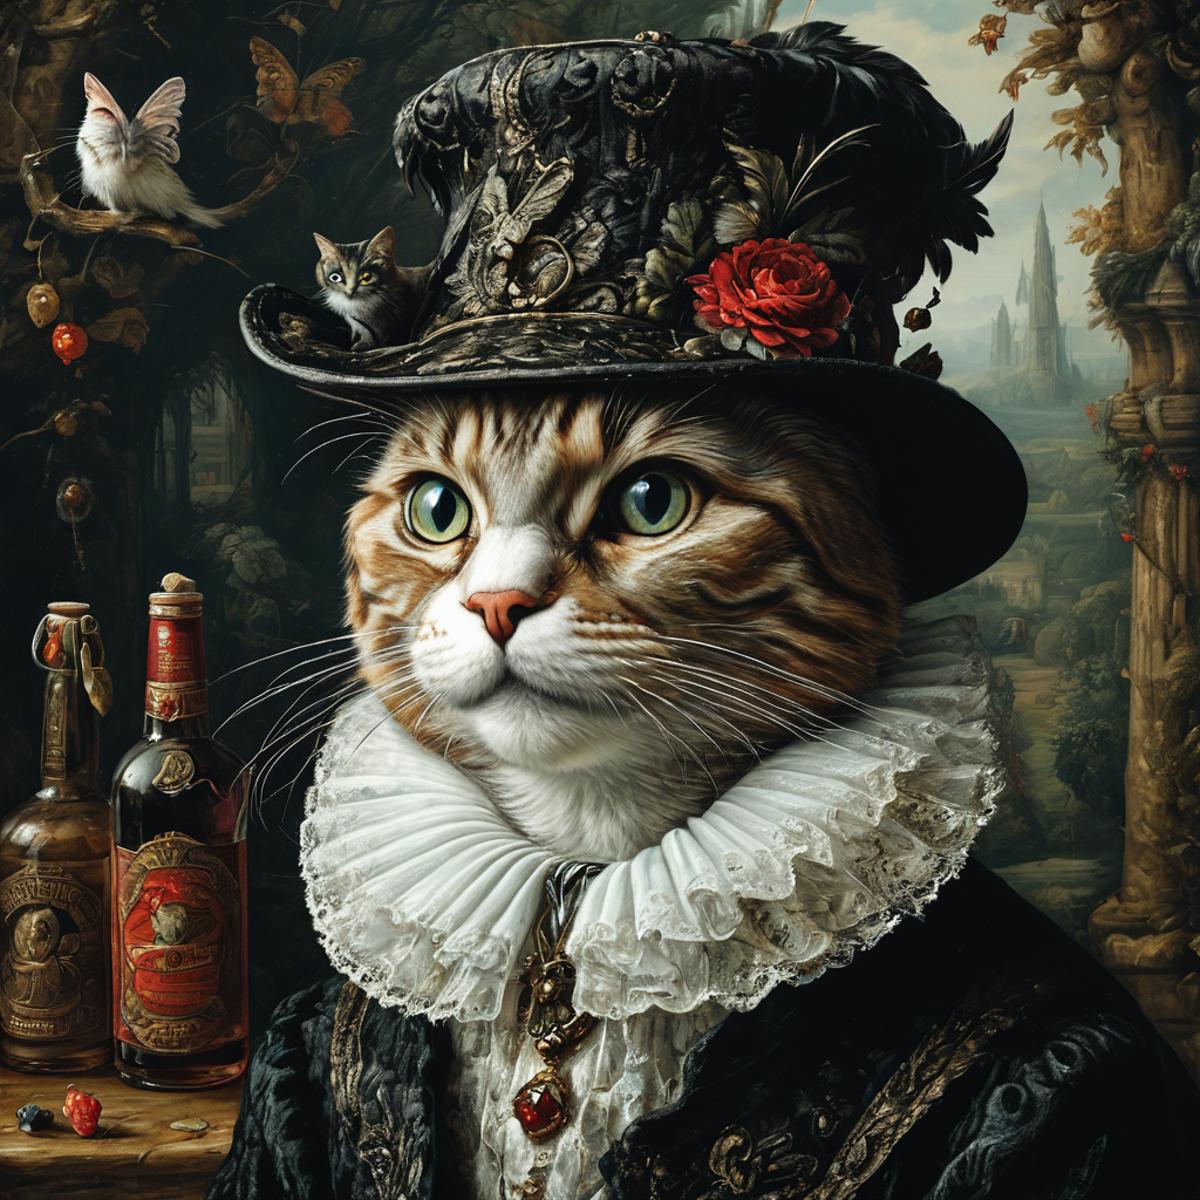 A painting of a cat wearing a top hat and lace collar.